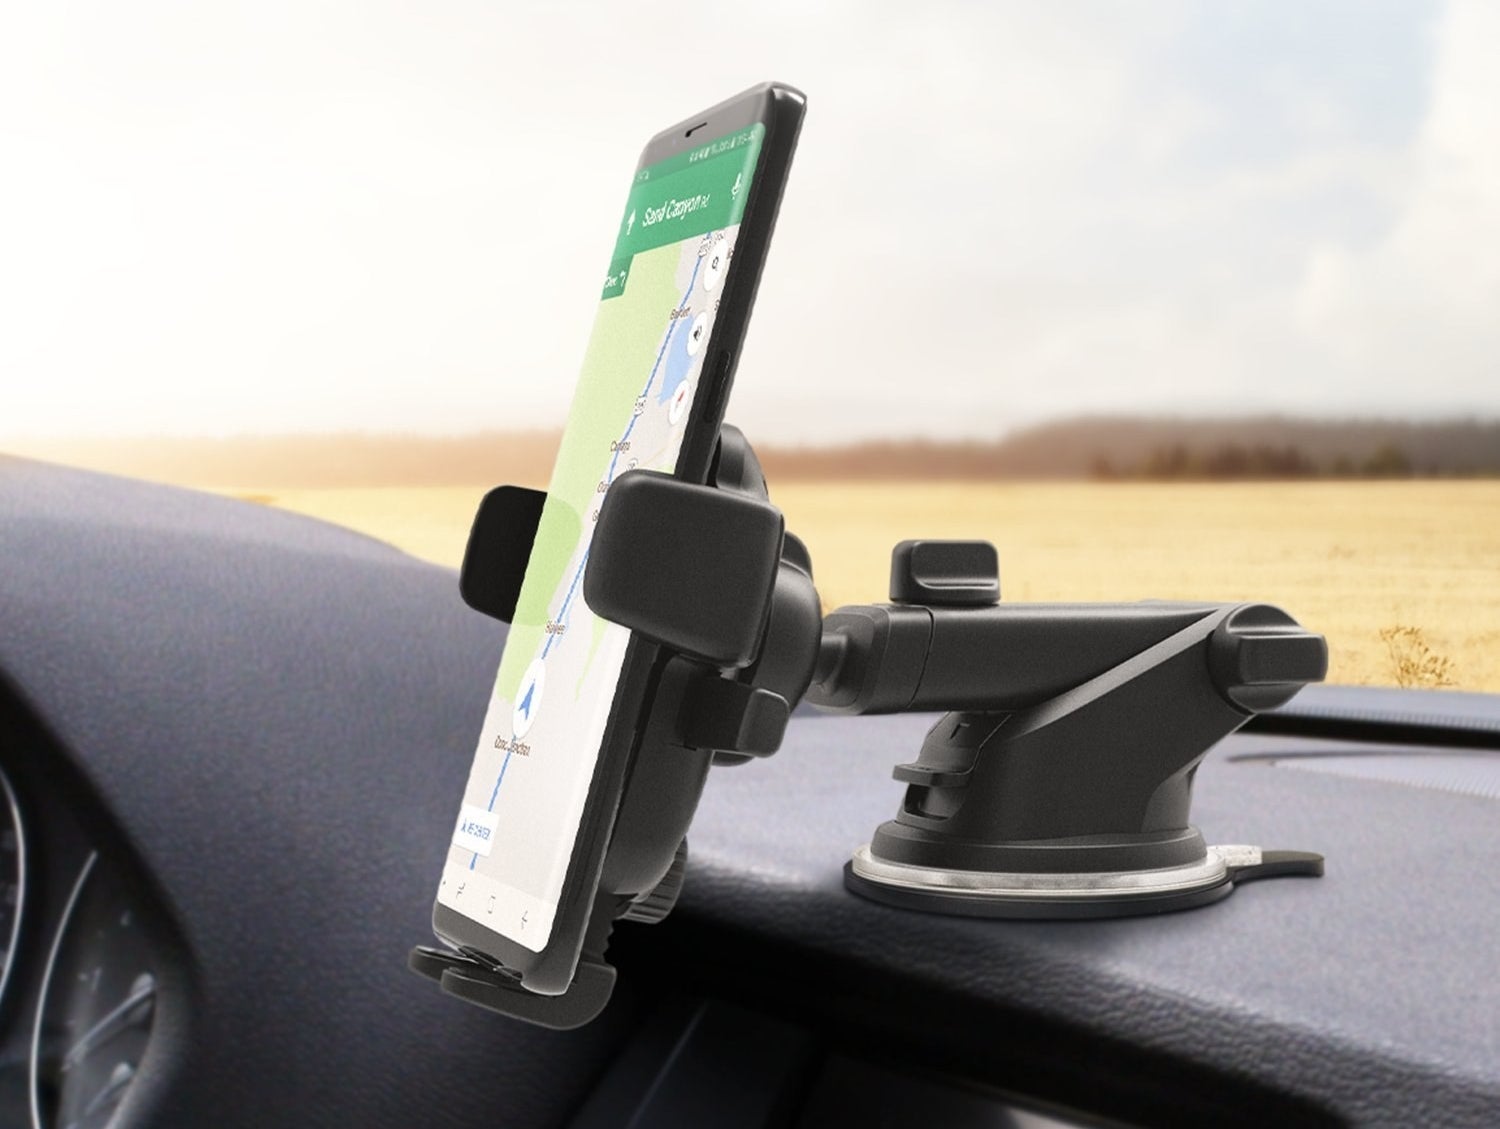 the holder mounted to a dashboard holding a smart phone